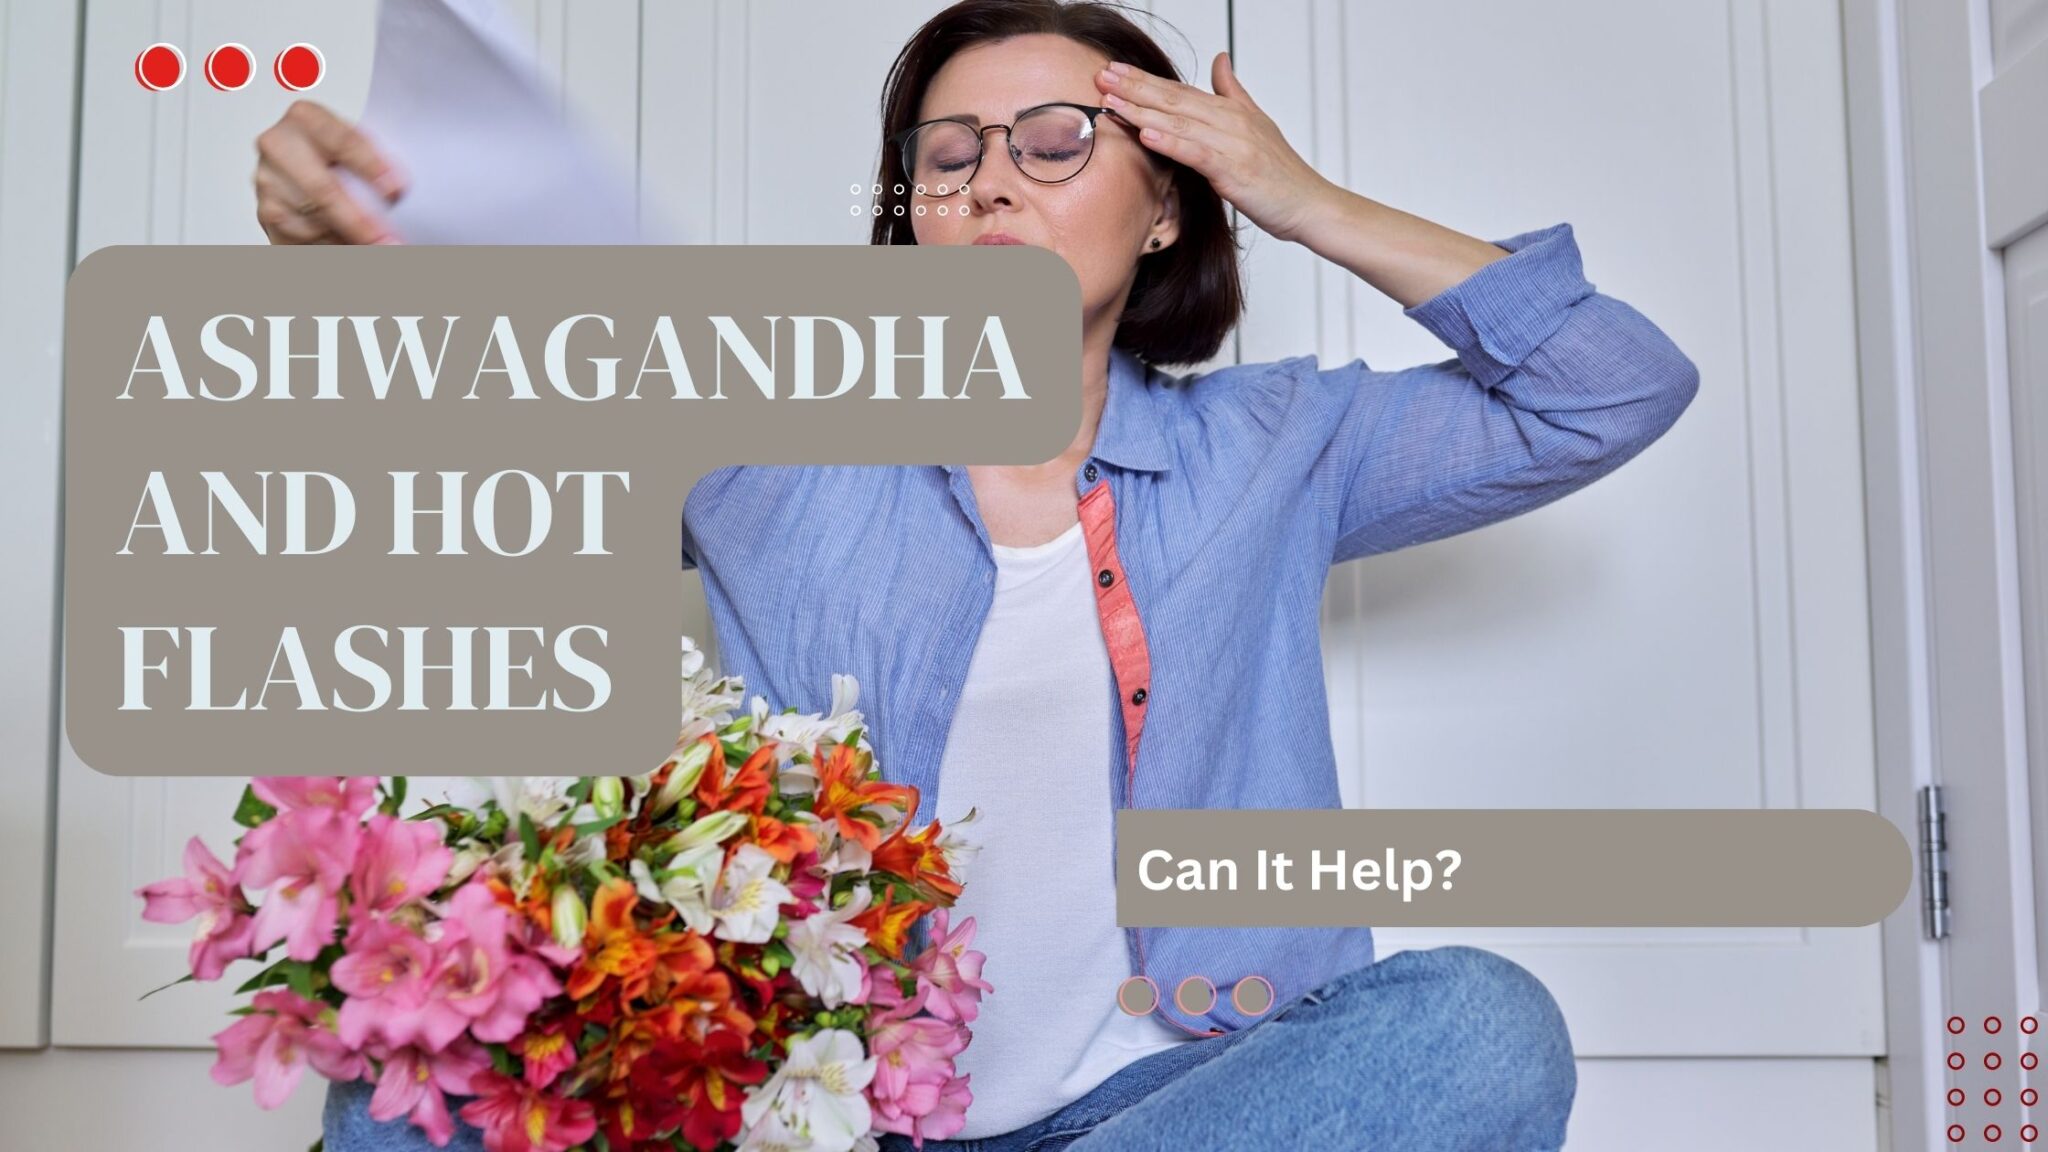 Hot Flashes Be Gone: How Ashwagandha Can Help Relieve Symptoms